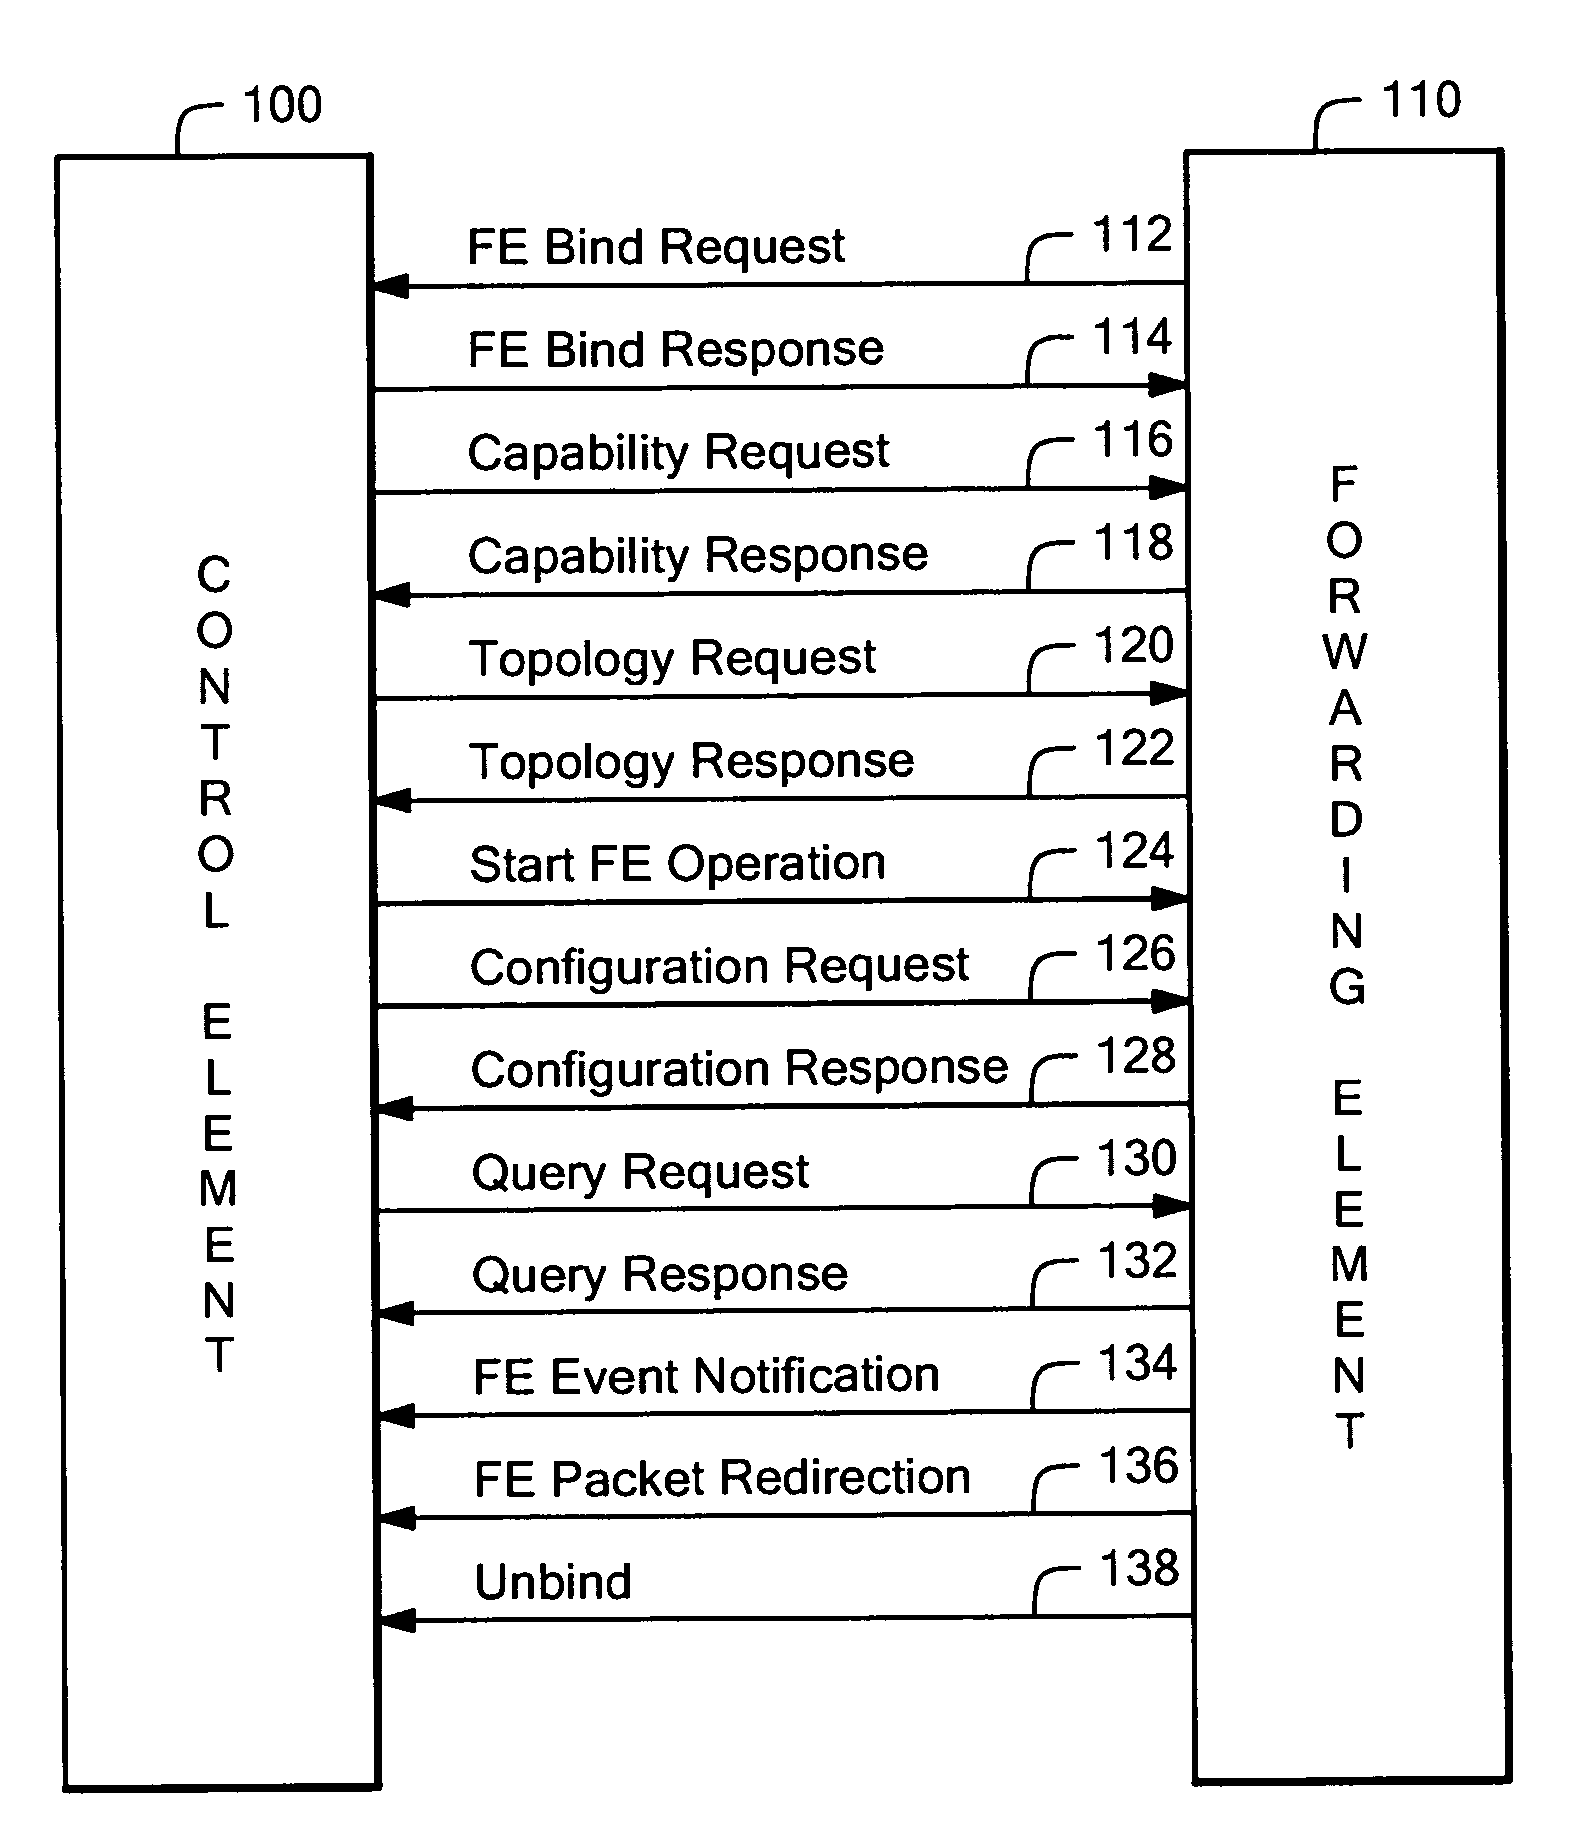 System and method to exchange information between a control element and forwarding elements in a network element architecture